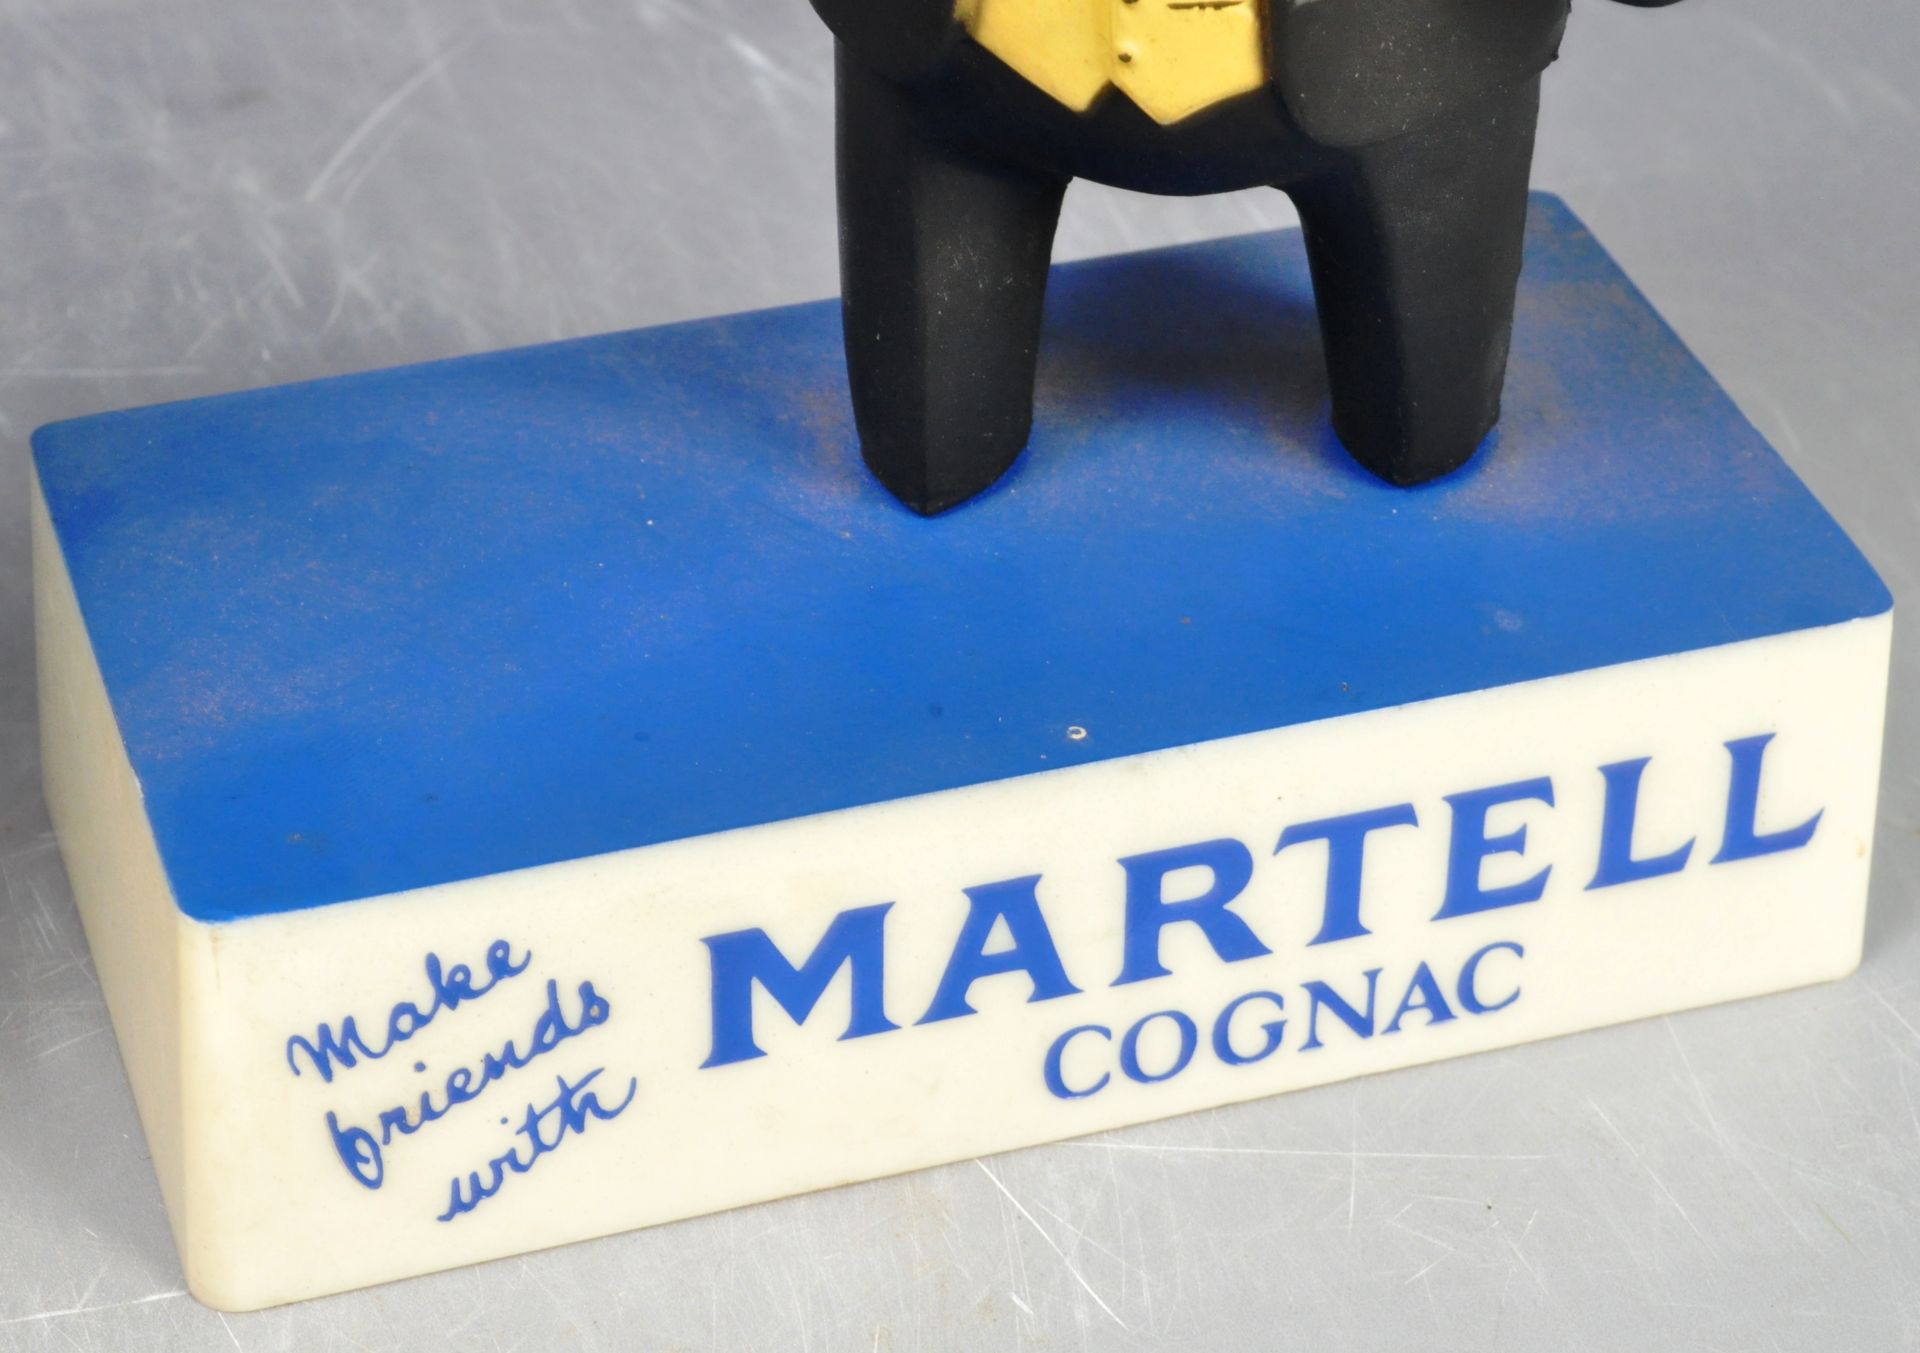 COLLECTION OF MARTELL COGNAC ADVERTISING FIGURES - Image 13 of 16